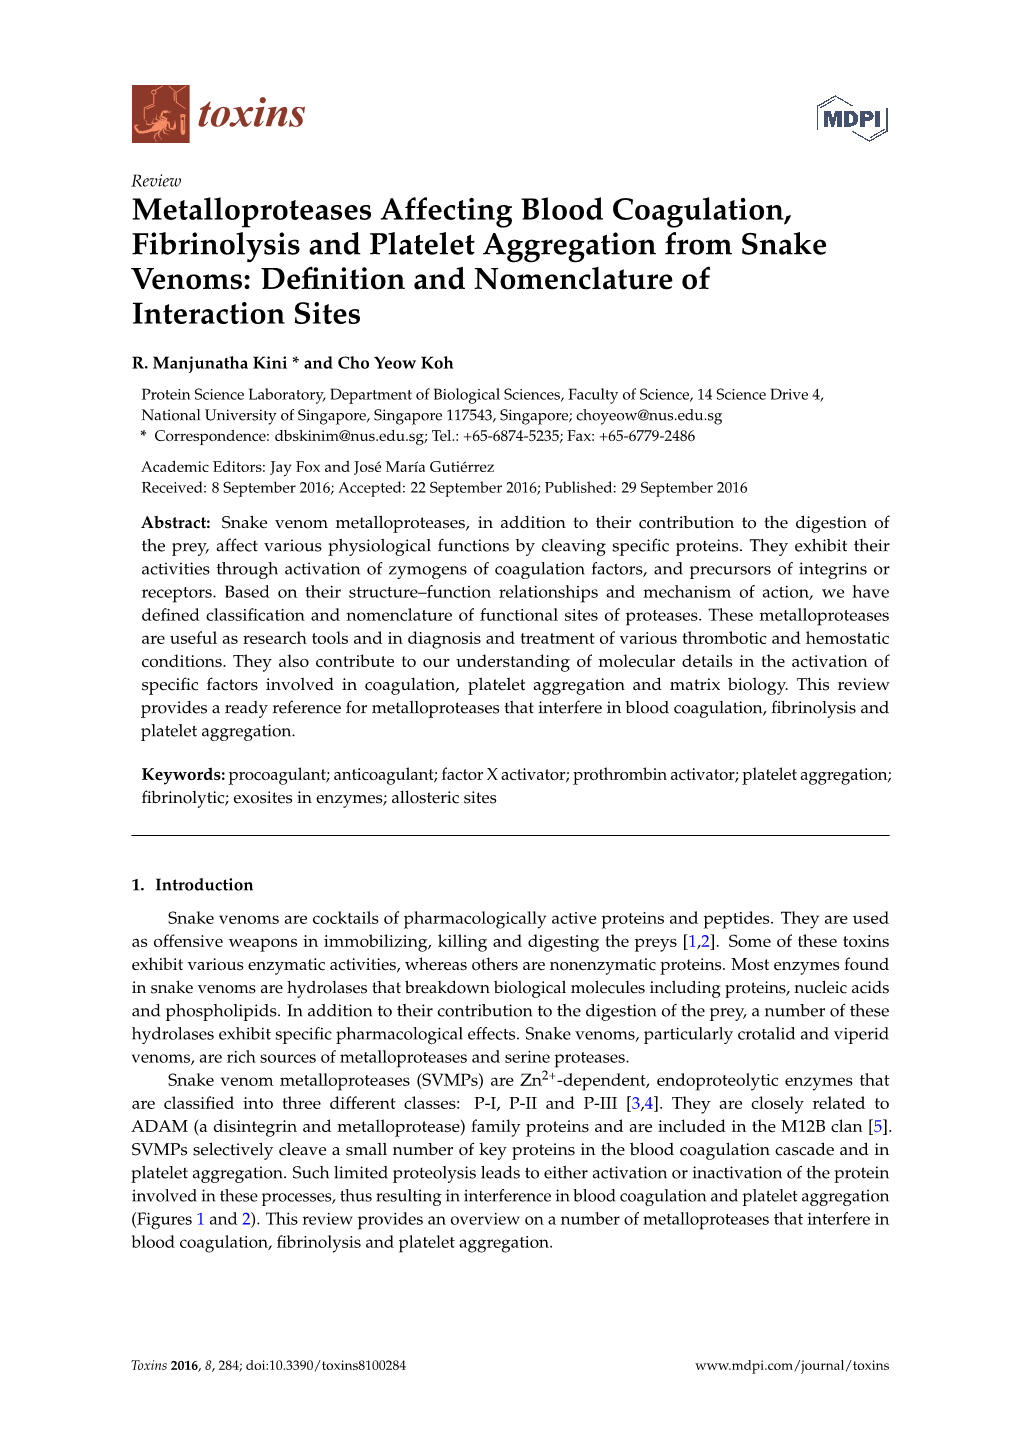 Metalloproteases Affecting Blood Coagulation, Fibrinolysis and Platelet Aggregation from Snake Venoms: Deﬁnition and Nomenclature of Interaction Sites